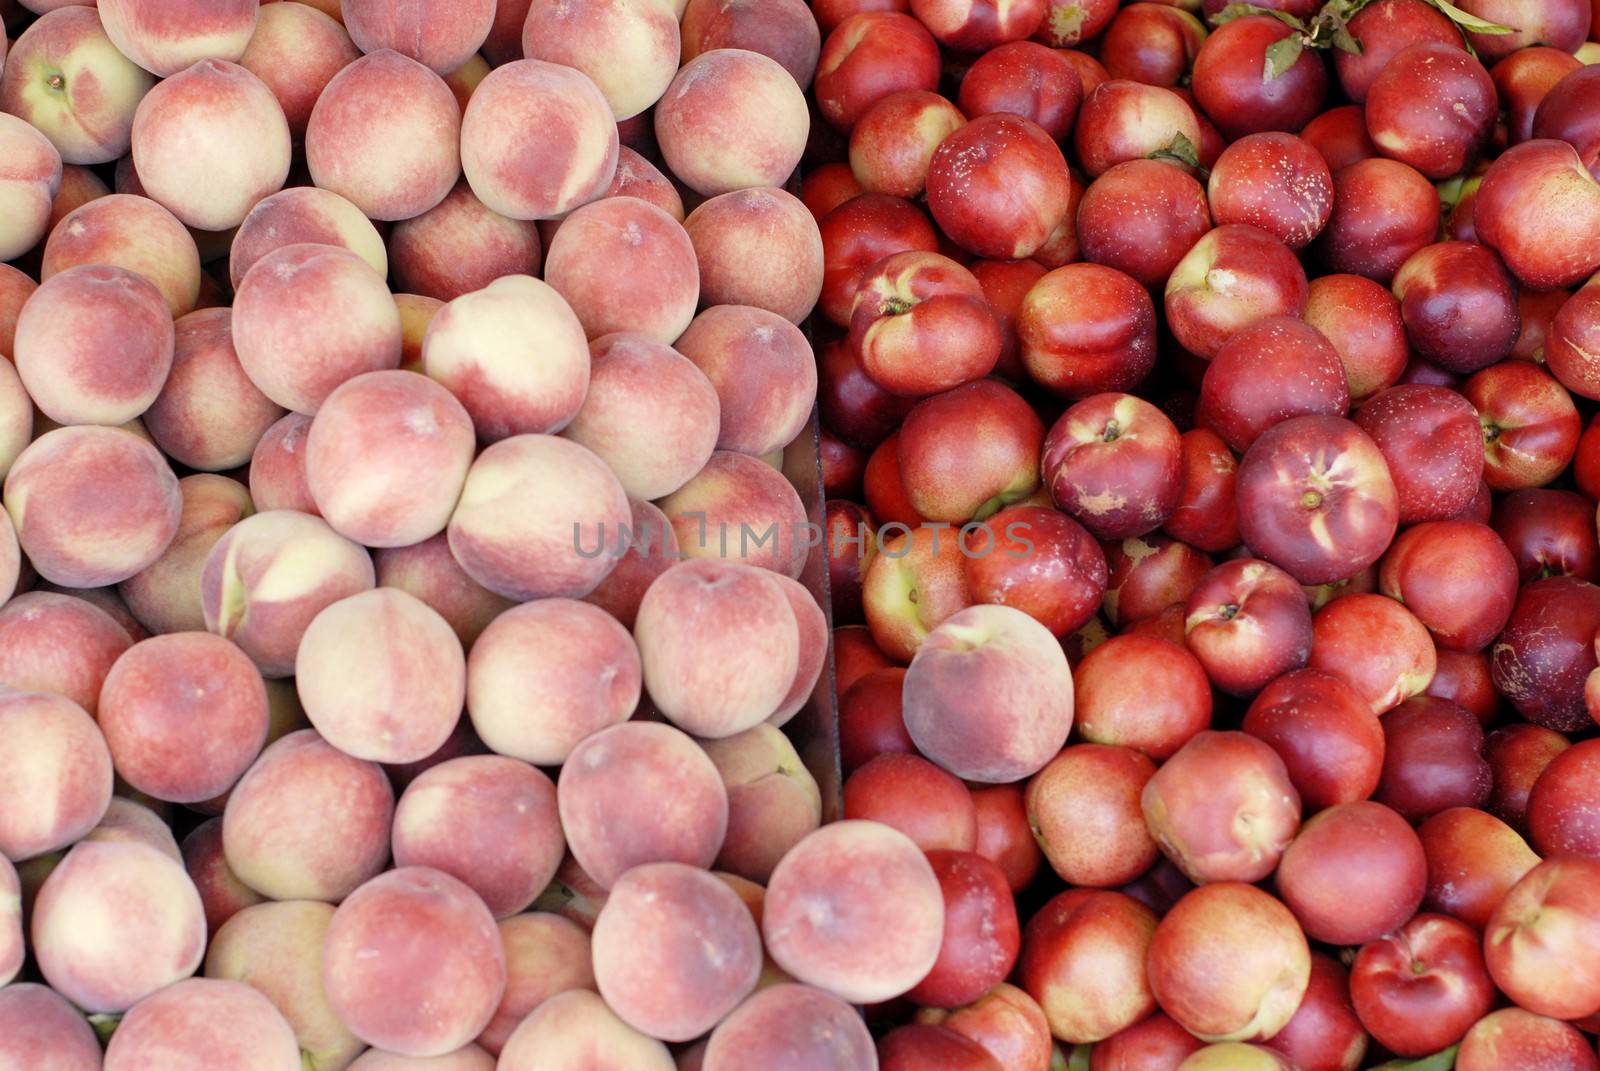 Yummy pile of apples for sale in a market stall by stockyimages